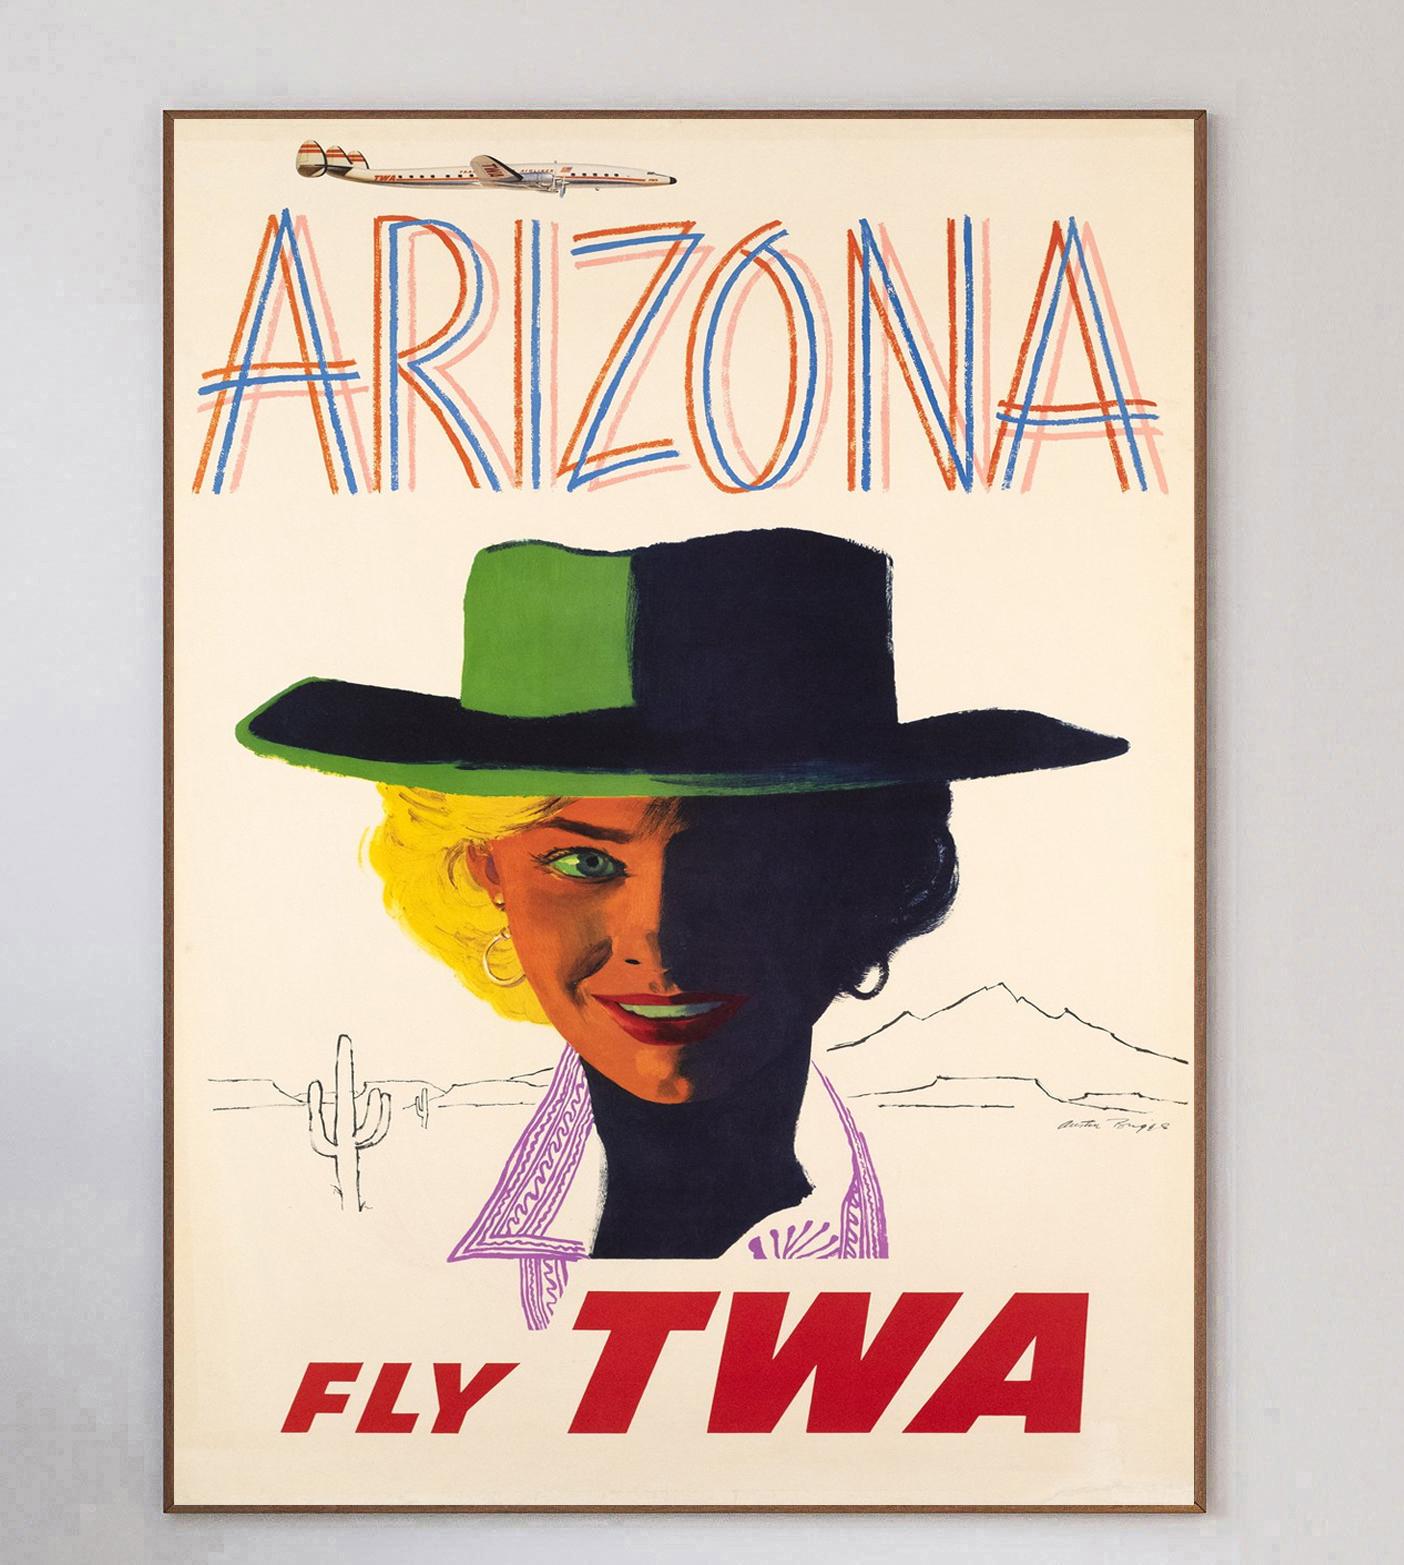 This poster was created in 1960 for Howard Hughes’ Trans World Airlines promoting their routes to Arizona, USA. Illustrated by American artist & cartoonist Austin Briggs, this design features a brilliant image of a woman in a cowboy hat in front of